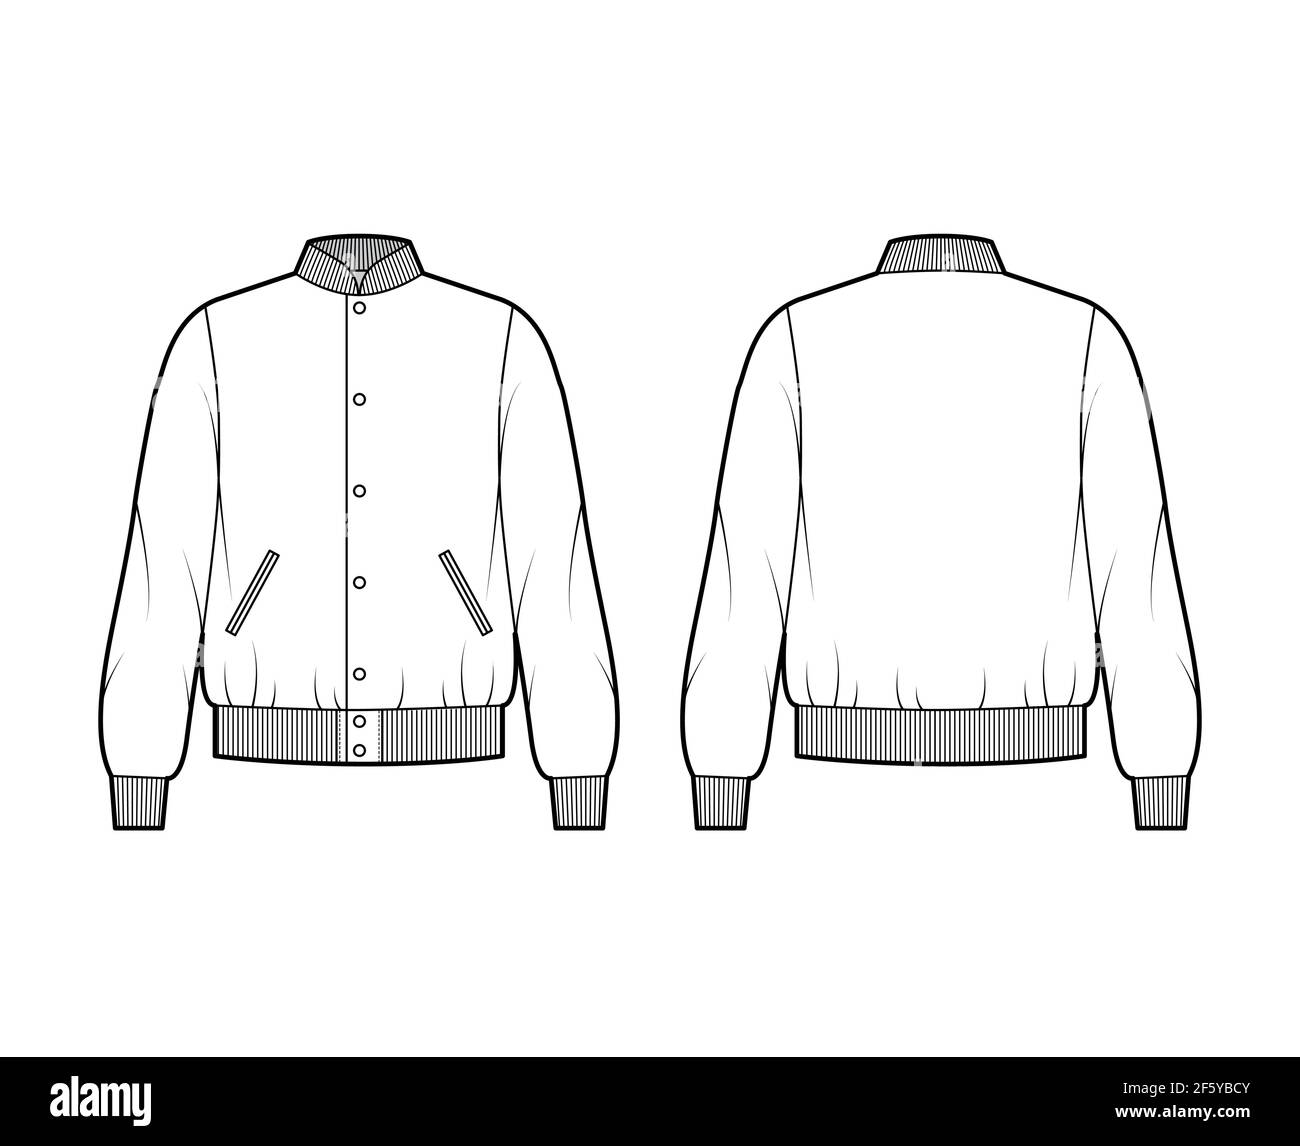 Technical Drawing Sample College Jacket Bomber Stock Vector Royalty Free  1785604229  Shutterstock